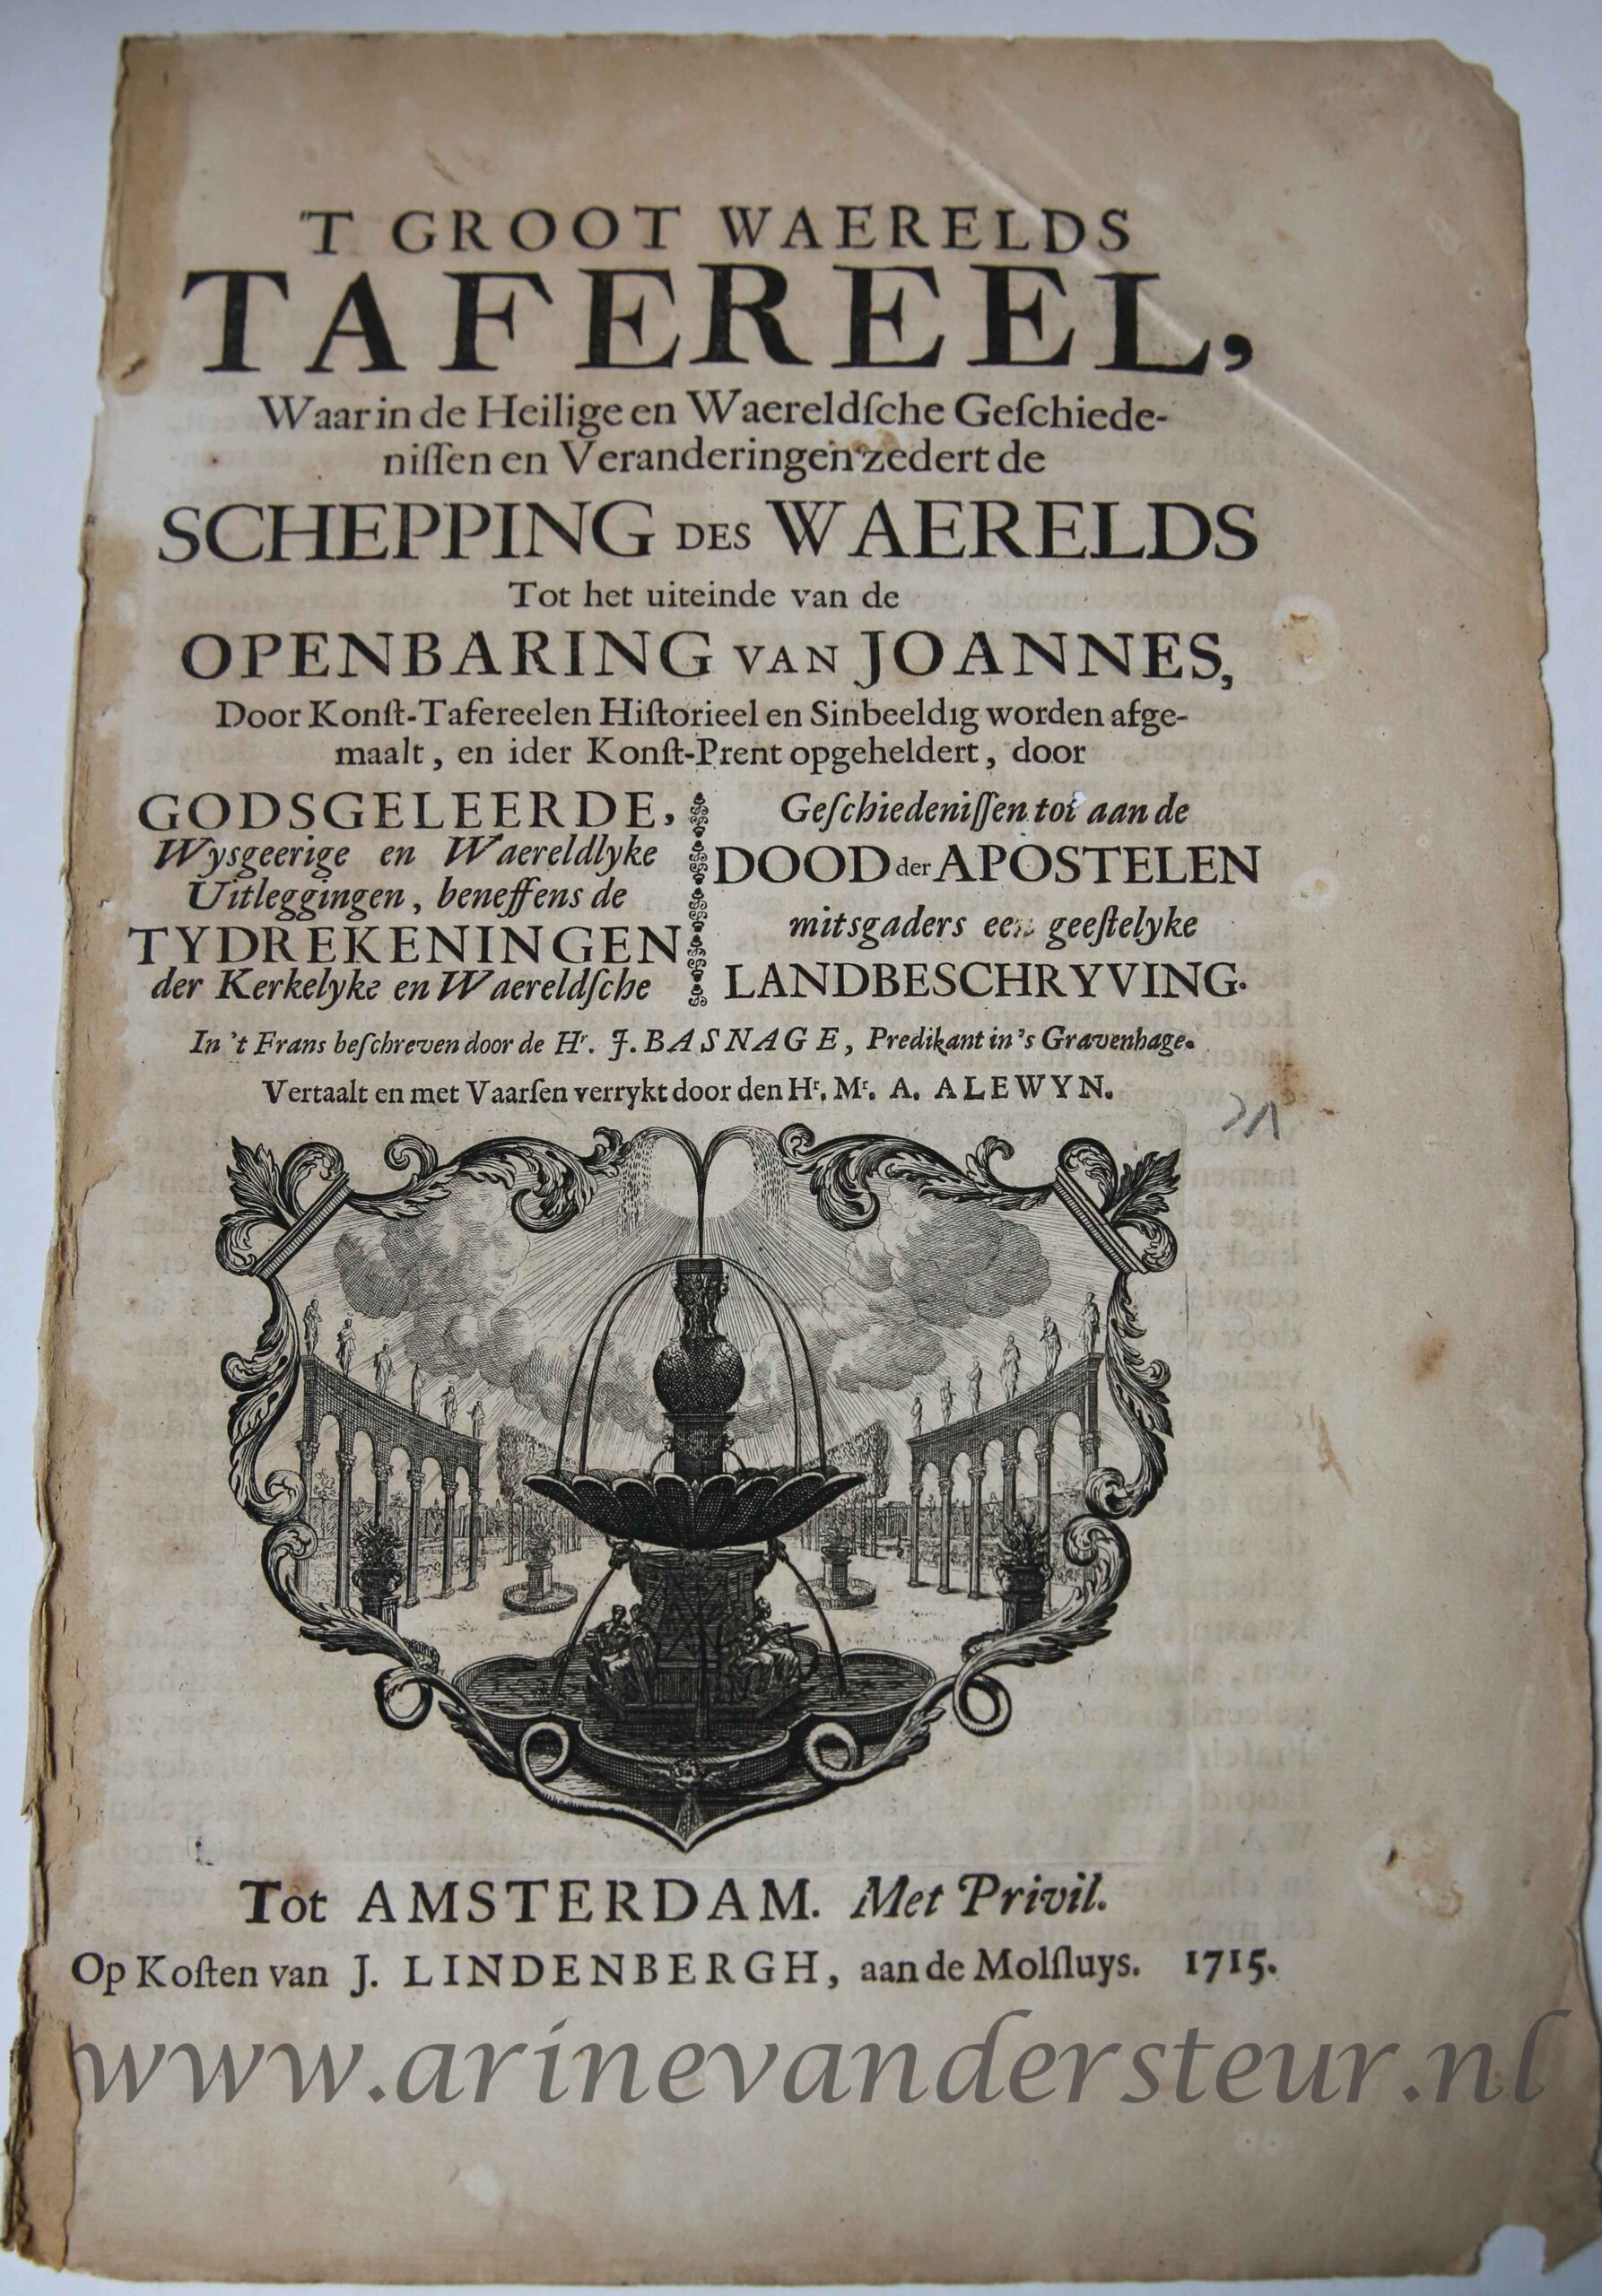 [Two antique prints, title page with vignettes] 'T GROOT WAERELDS TAFEREEL..., published 1715, 2 pp.